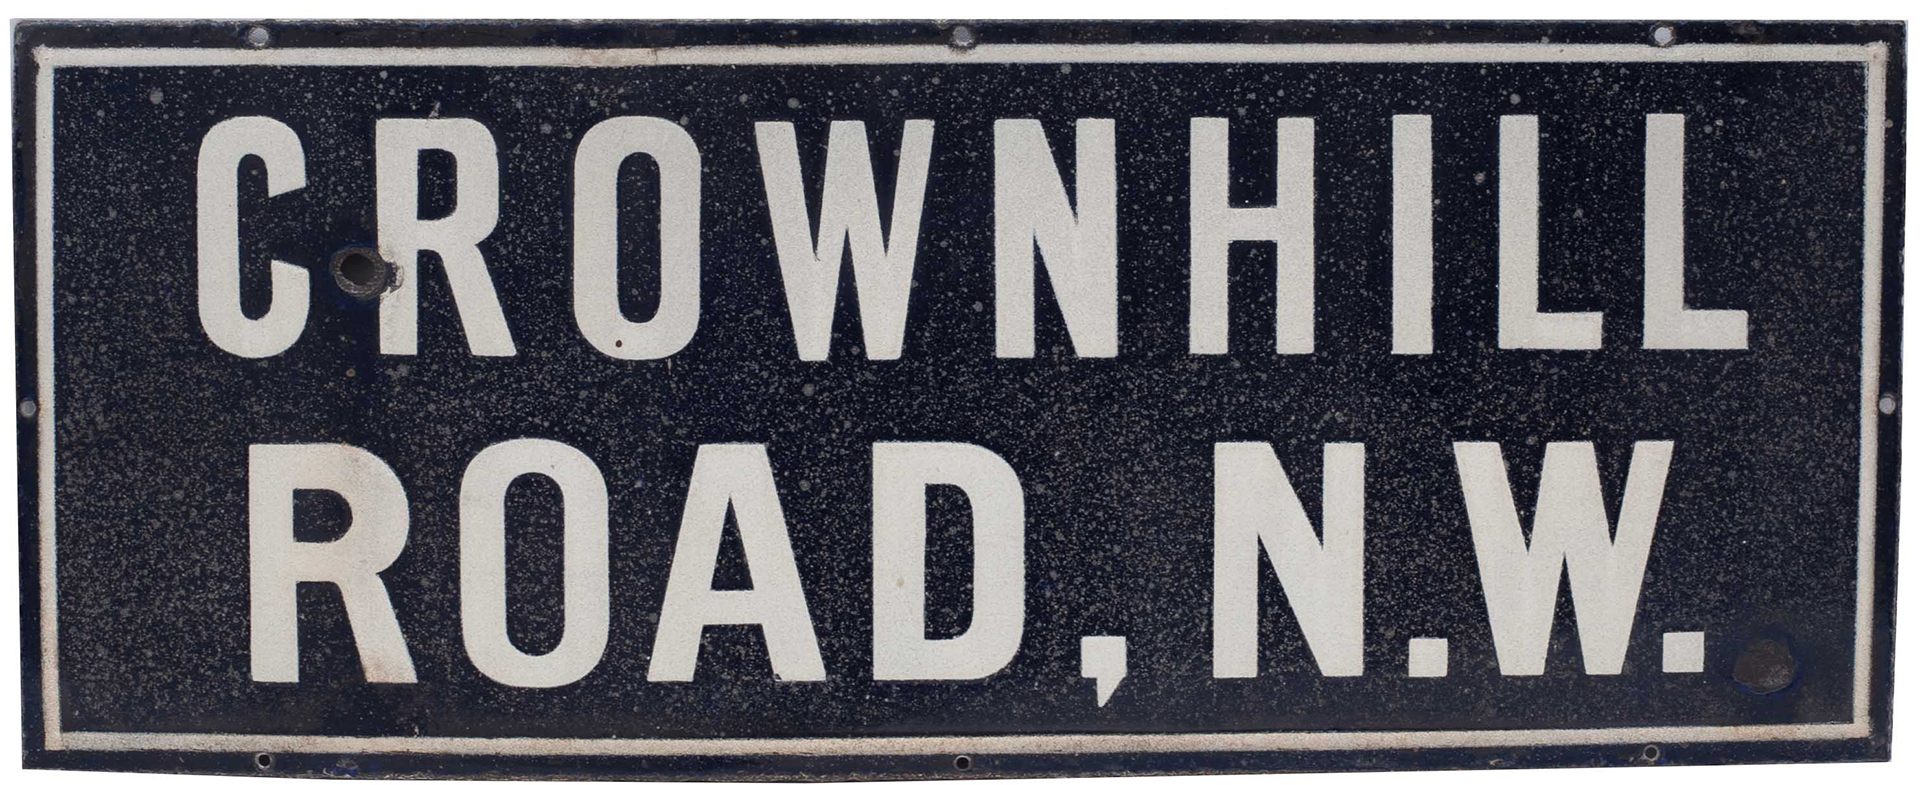 Road sign CROWN HILL ROAD N.W. A Victorian enamel sign in very good condition, measures 30in x